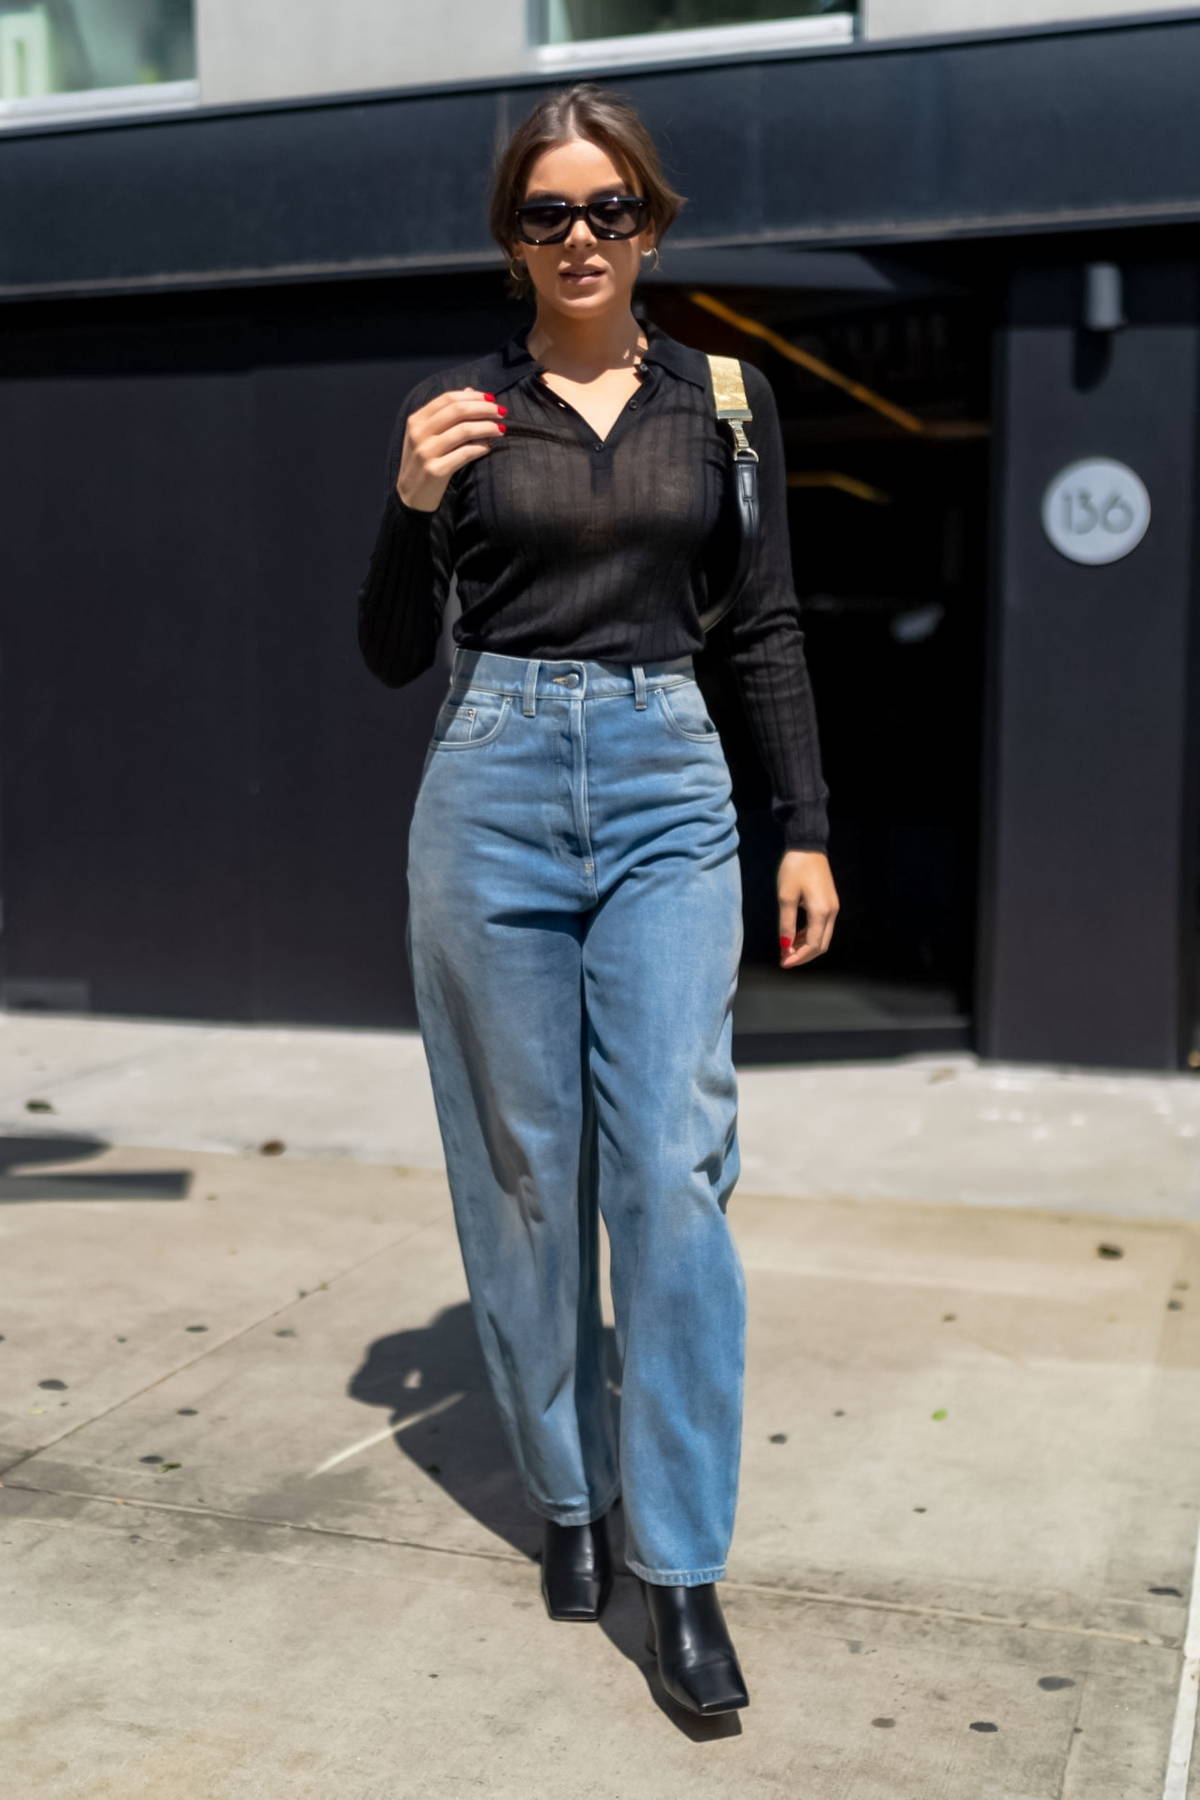 hailee steinfeld looks fab in a black top and jeans while out in soho ...